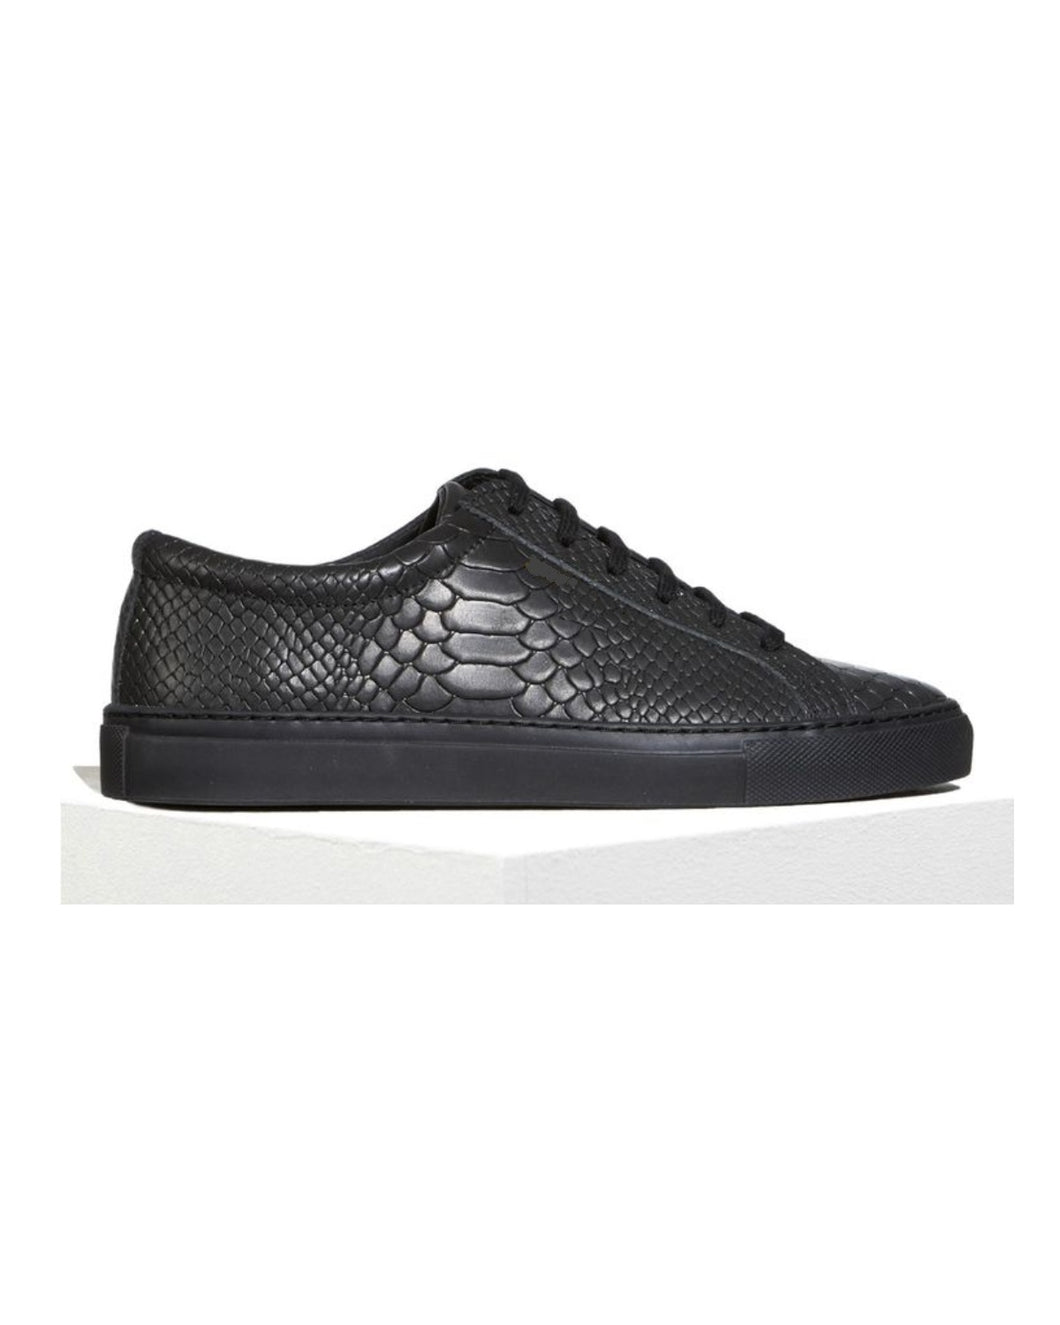 GOVERNORS SCALE SKIN LACE UP SNEAKERS